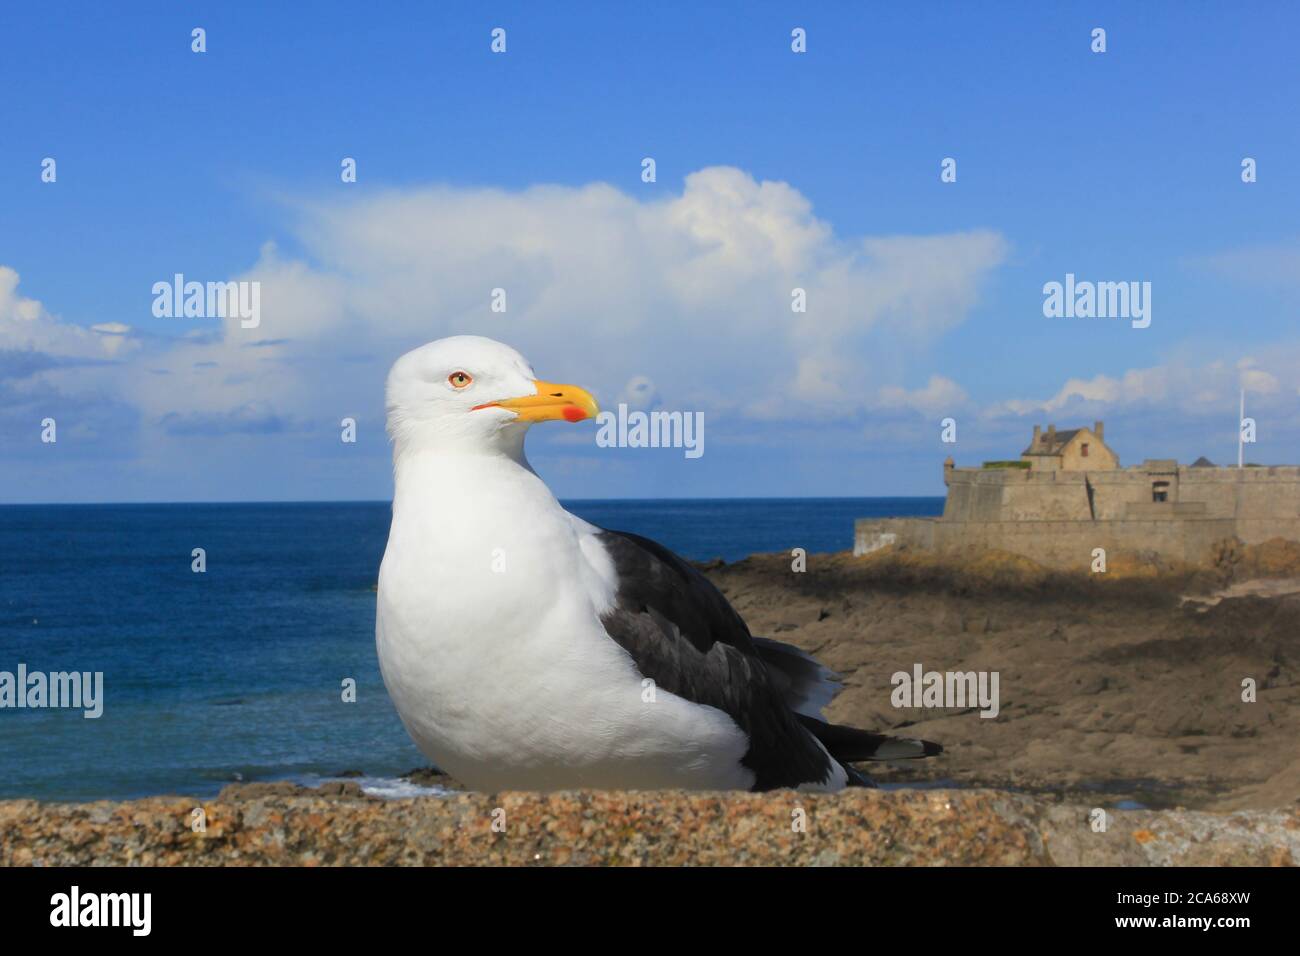 Seagull with bright yellow beak is resting on a stone with sea and castle in the background Stock Photo